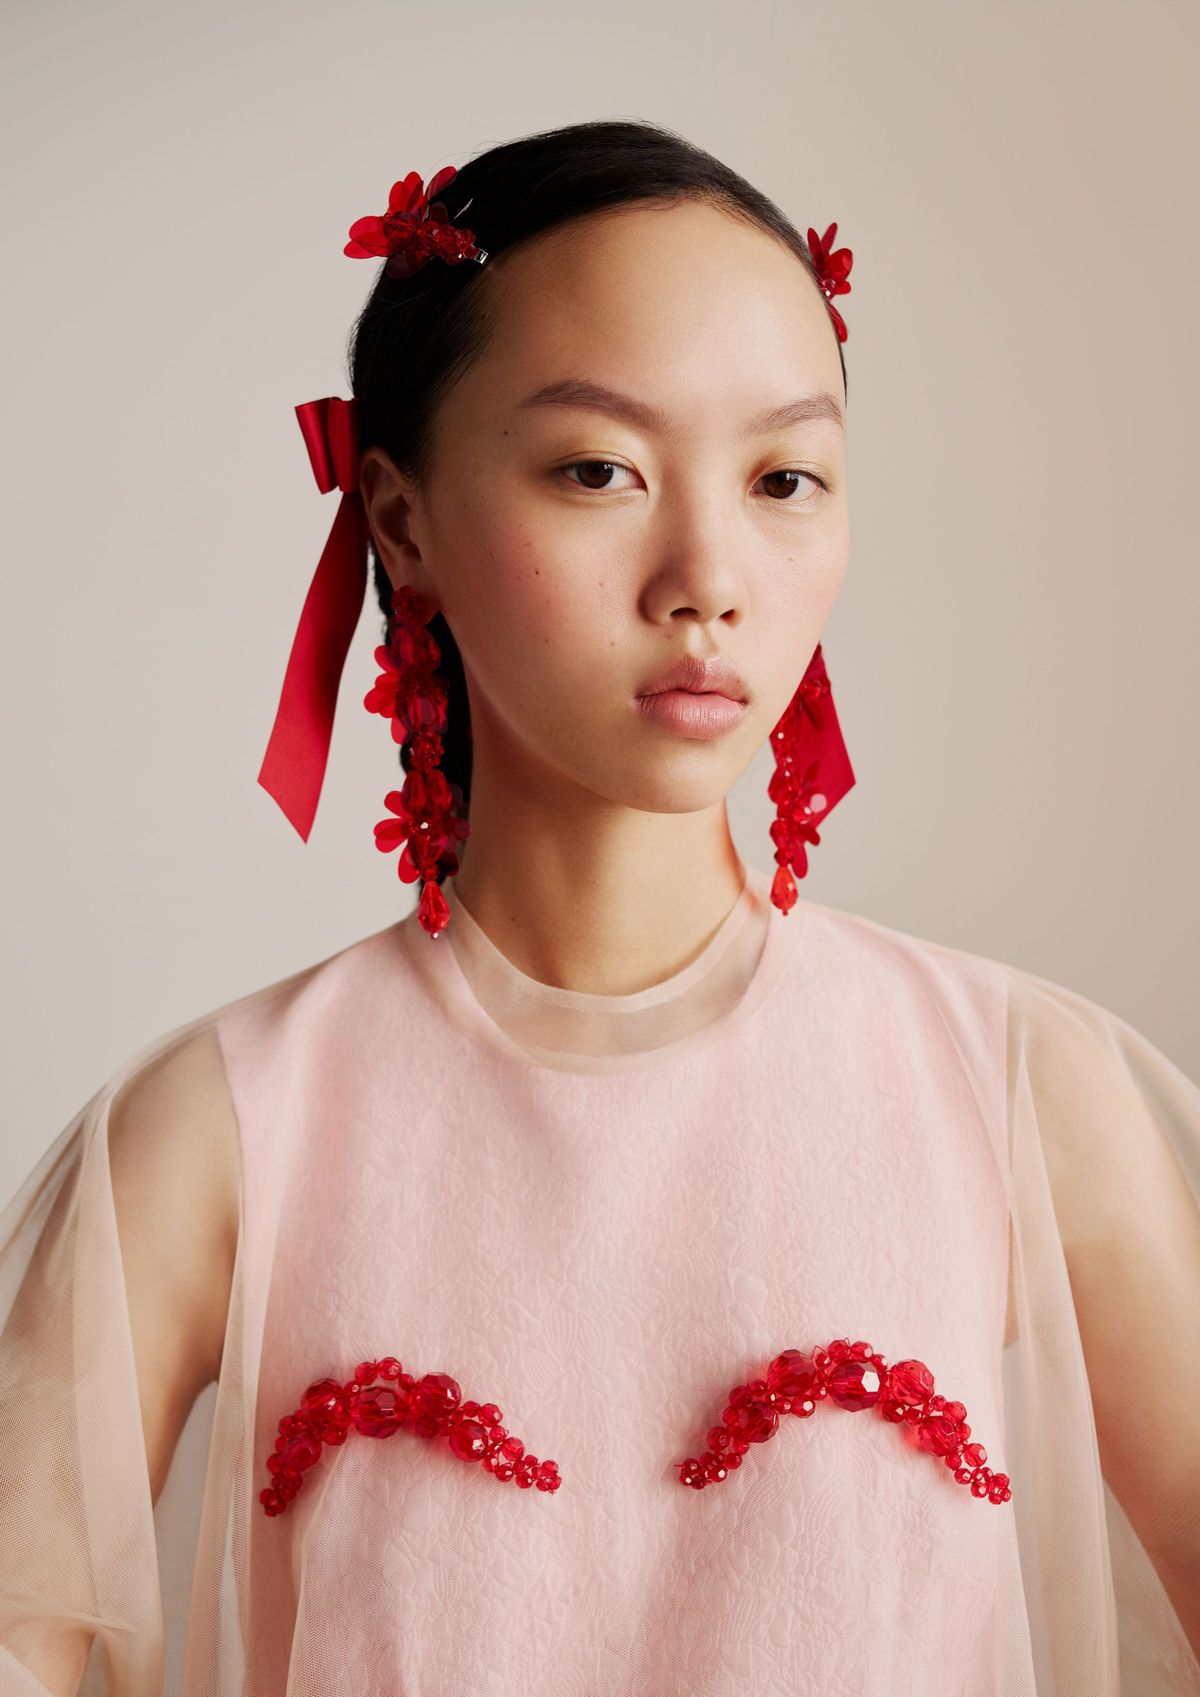 Simone Rocha x H&M Is The Perfect Mix of Sweet and Subversive